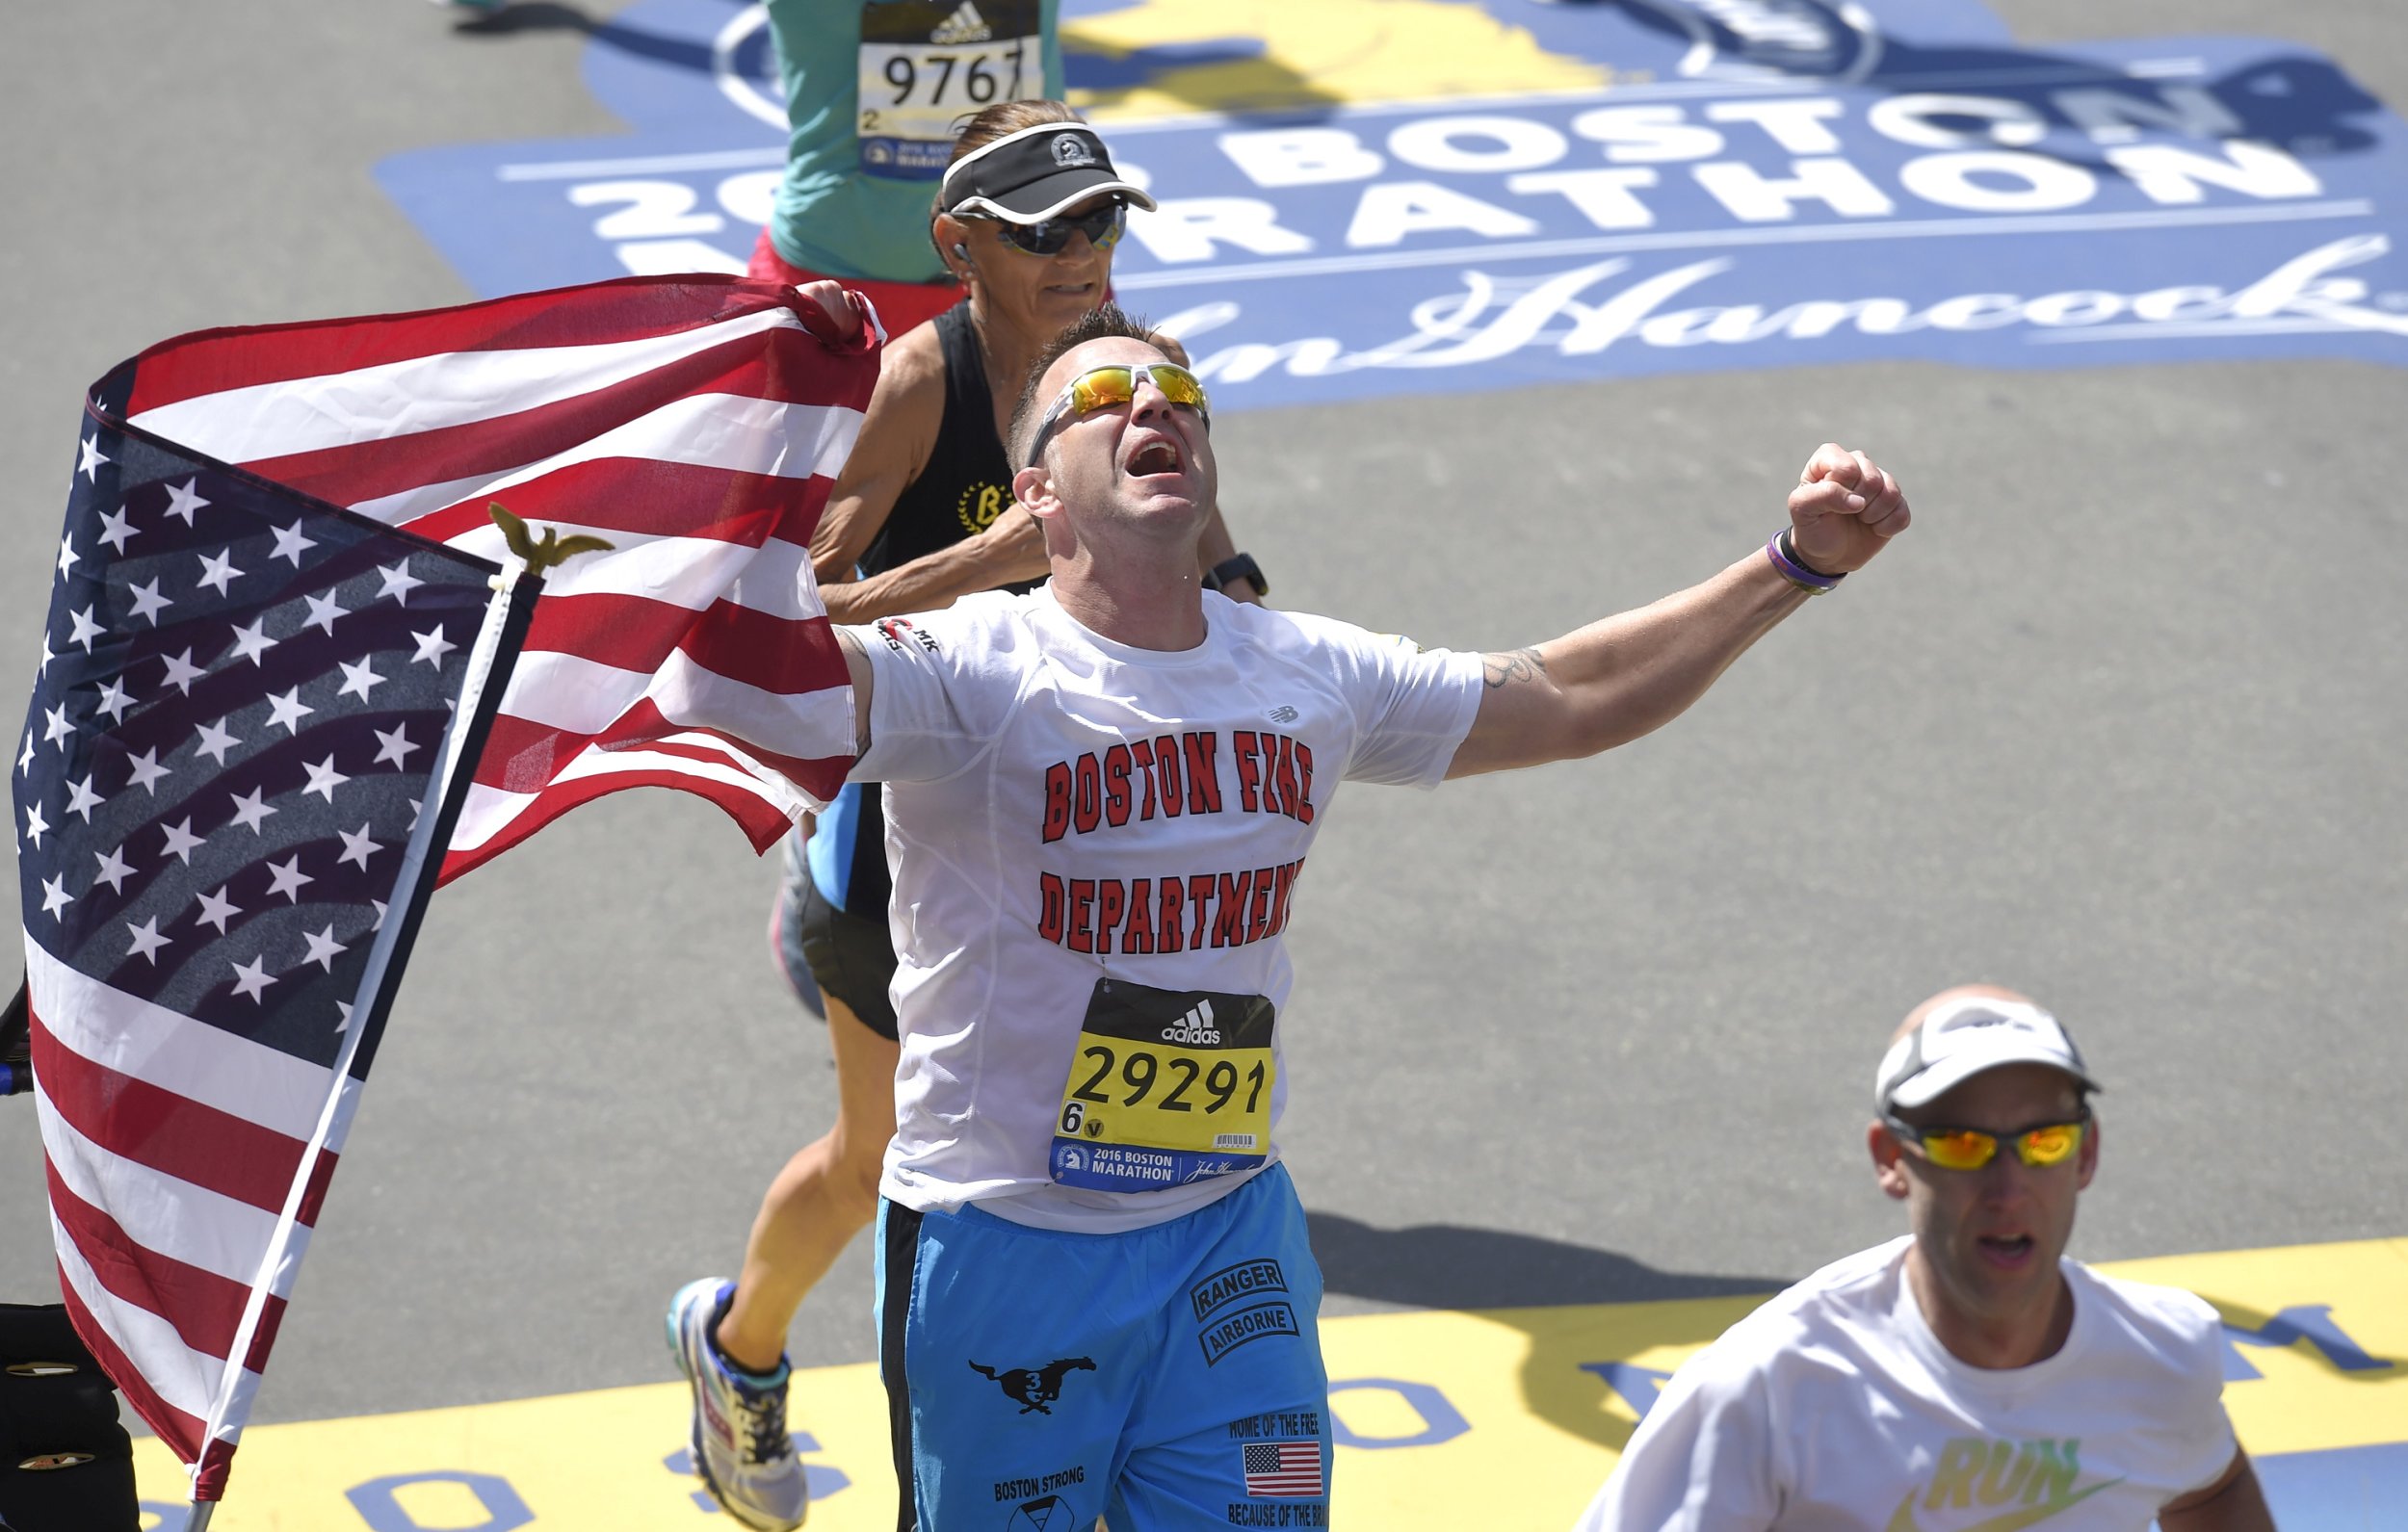 Boston Marathon Live Stream, Starting Time, Route And Best Viewing Spots